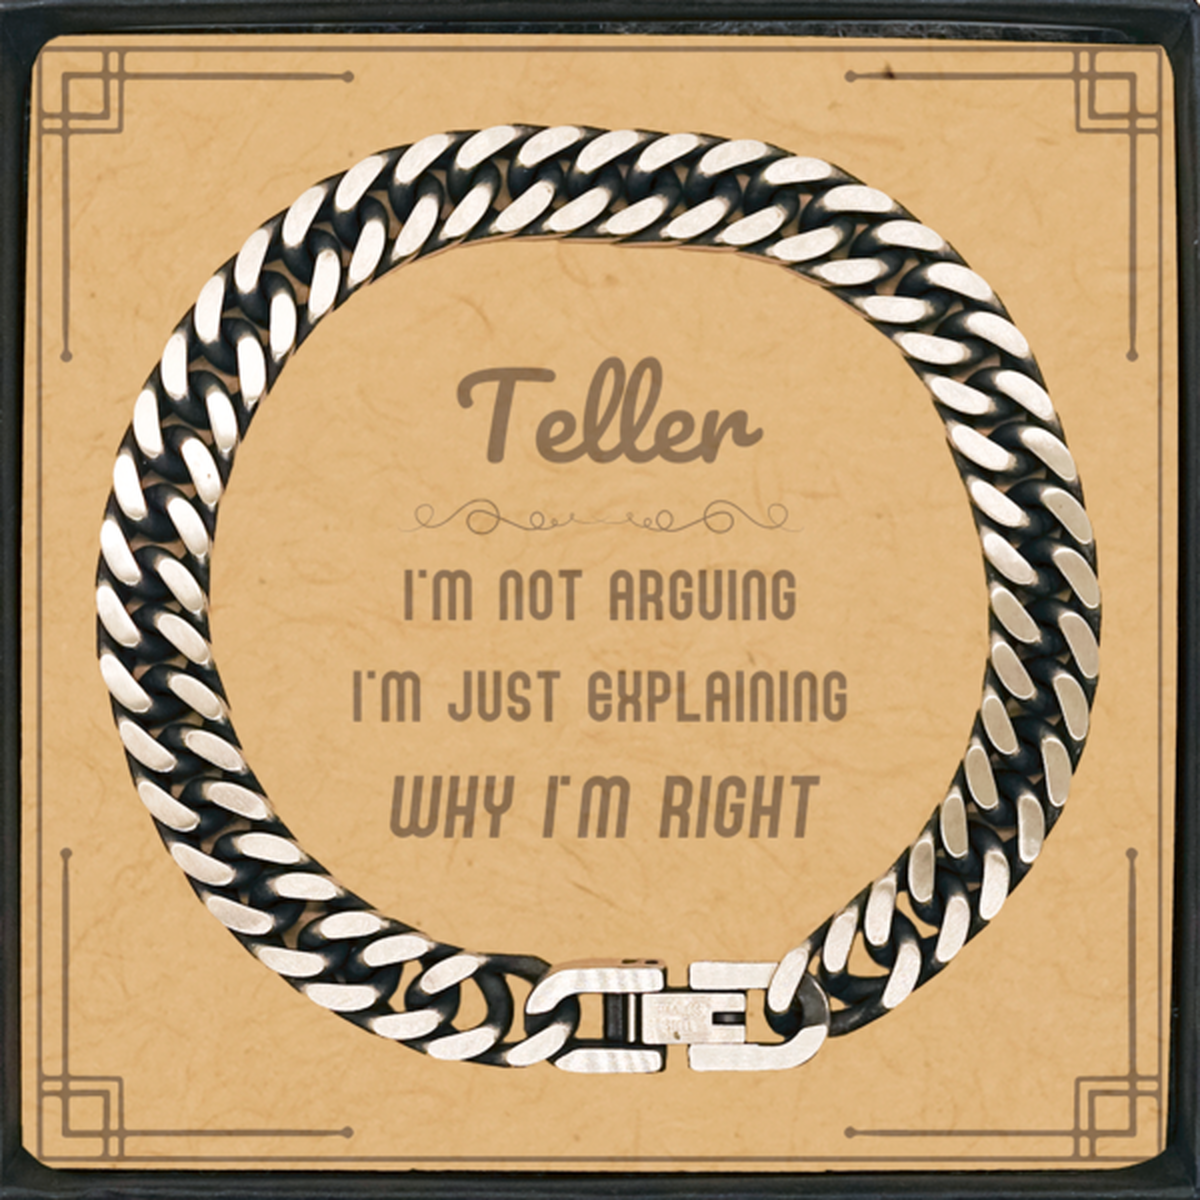 Teller I'm not Arguing. I'm Just Explaining Why I'm RIGHT Cuban Link Chain Bracelet, Funny Saying Quote Teller Gifts For Teller Message Card Graduation Birthday Christmas Gifts for Men Women Coworker